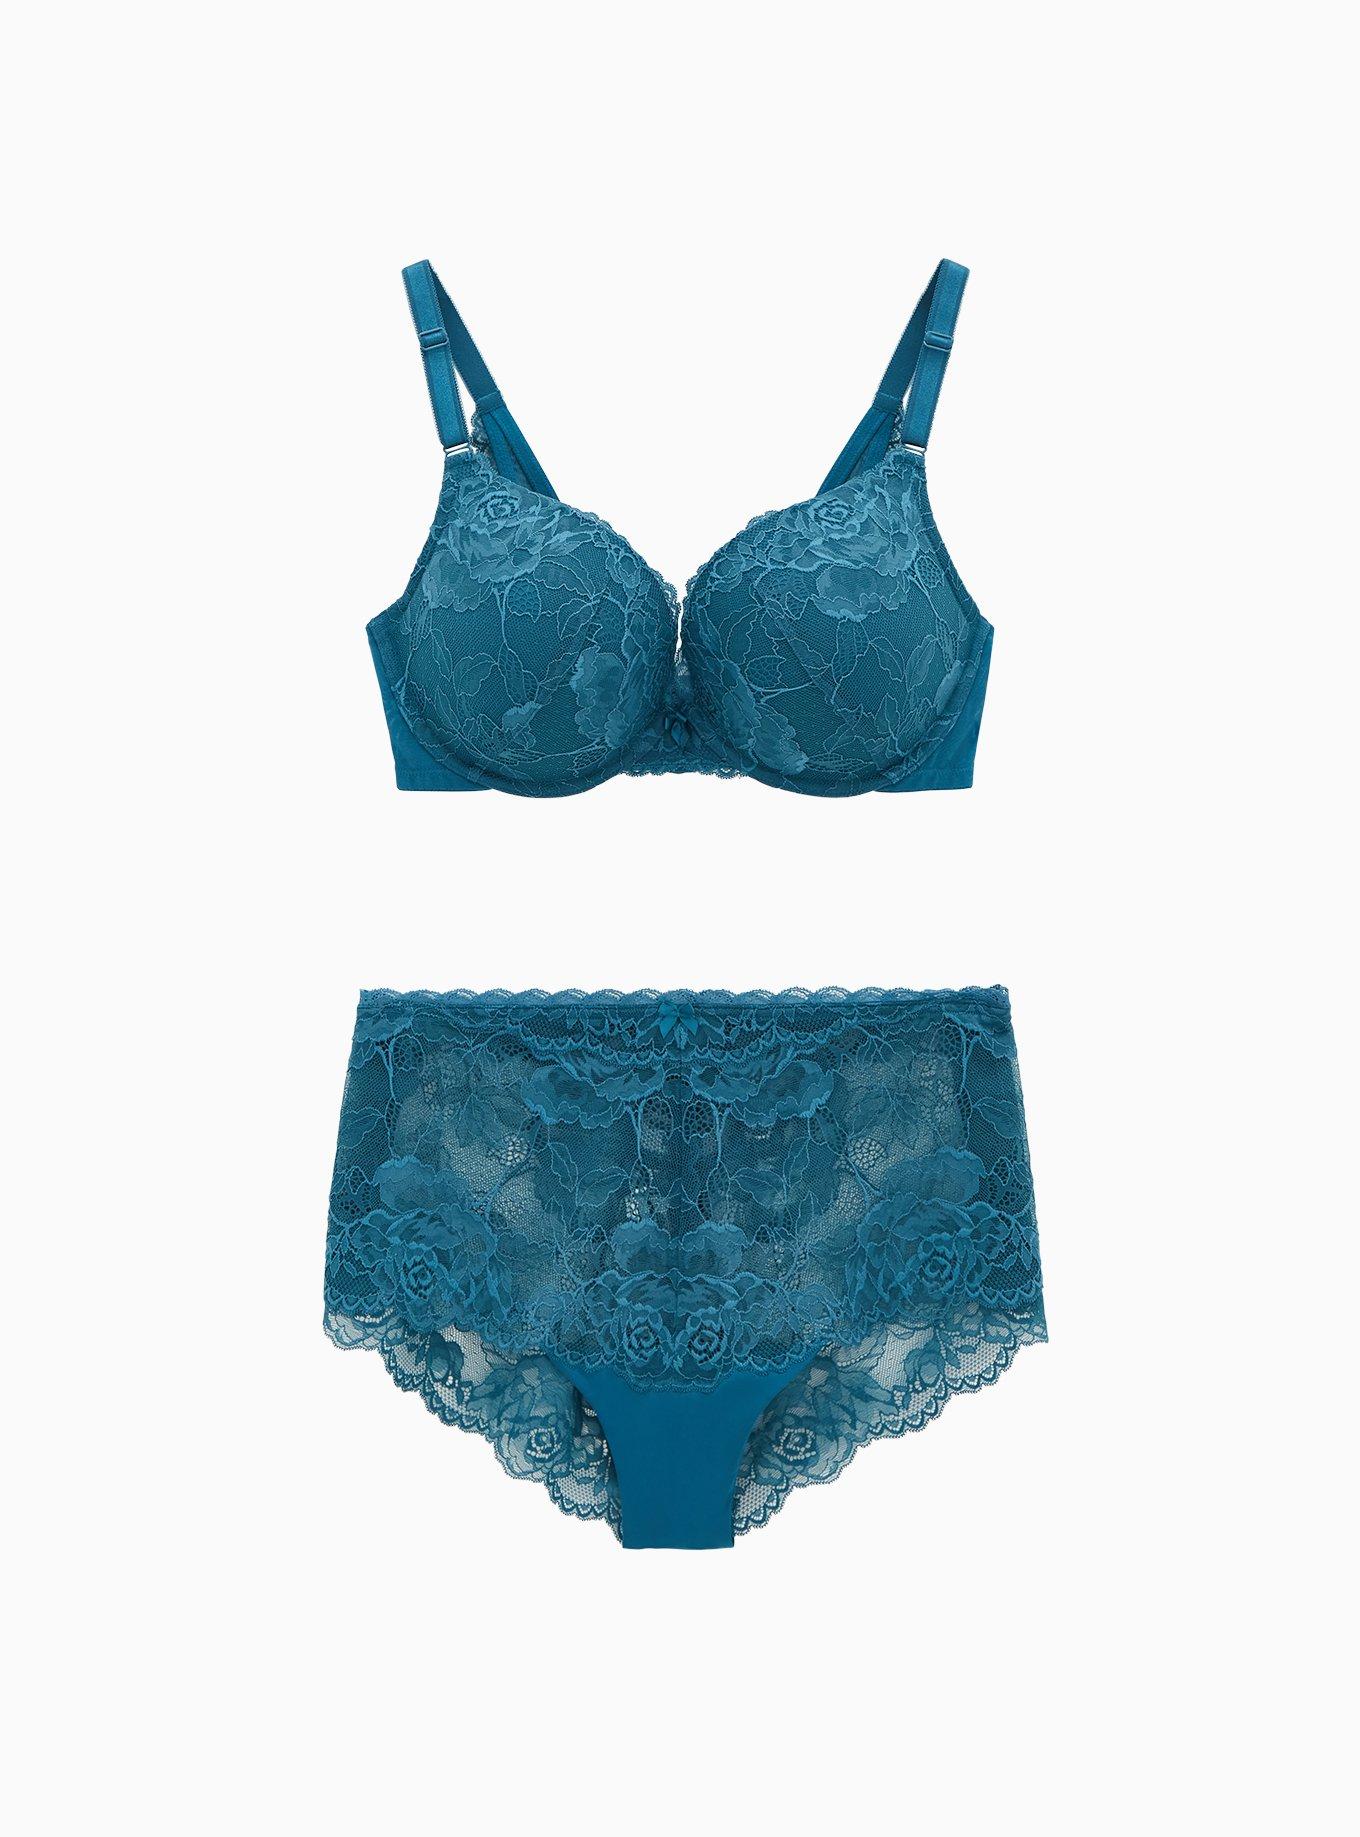 NWT TORRID $48 Teal Blue Chunky Lace Push Up Plunge Bra Size 36D Sexy  Underwire